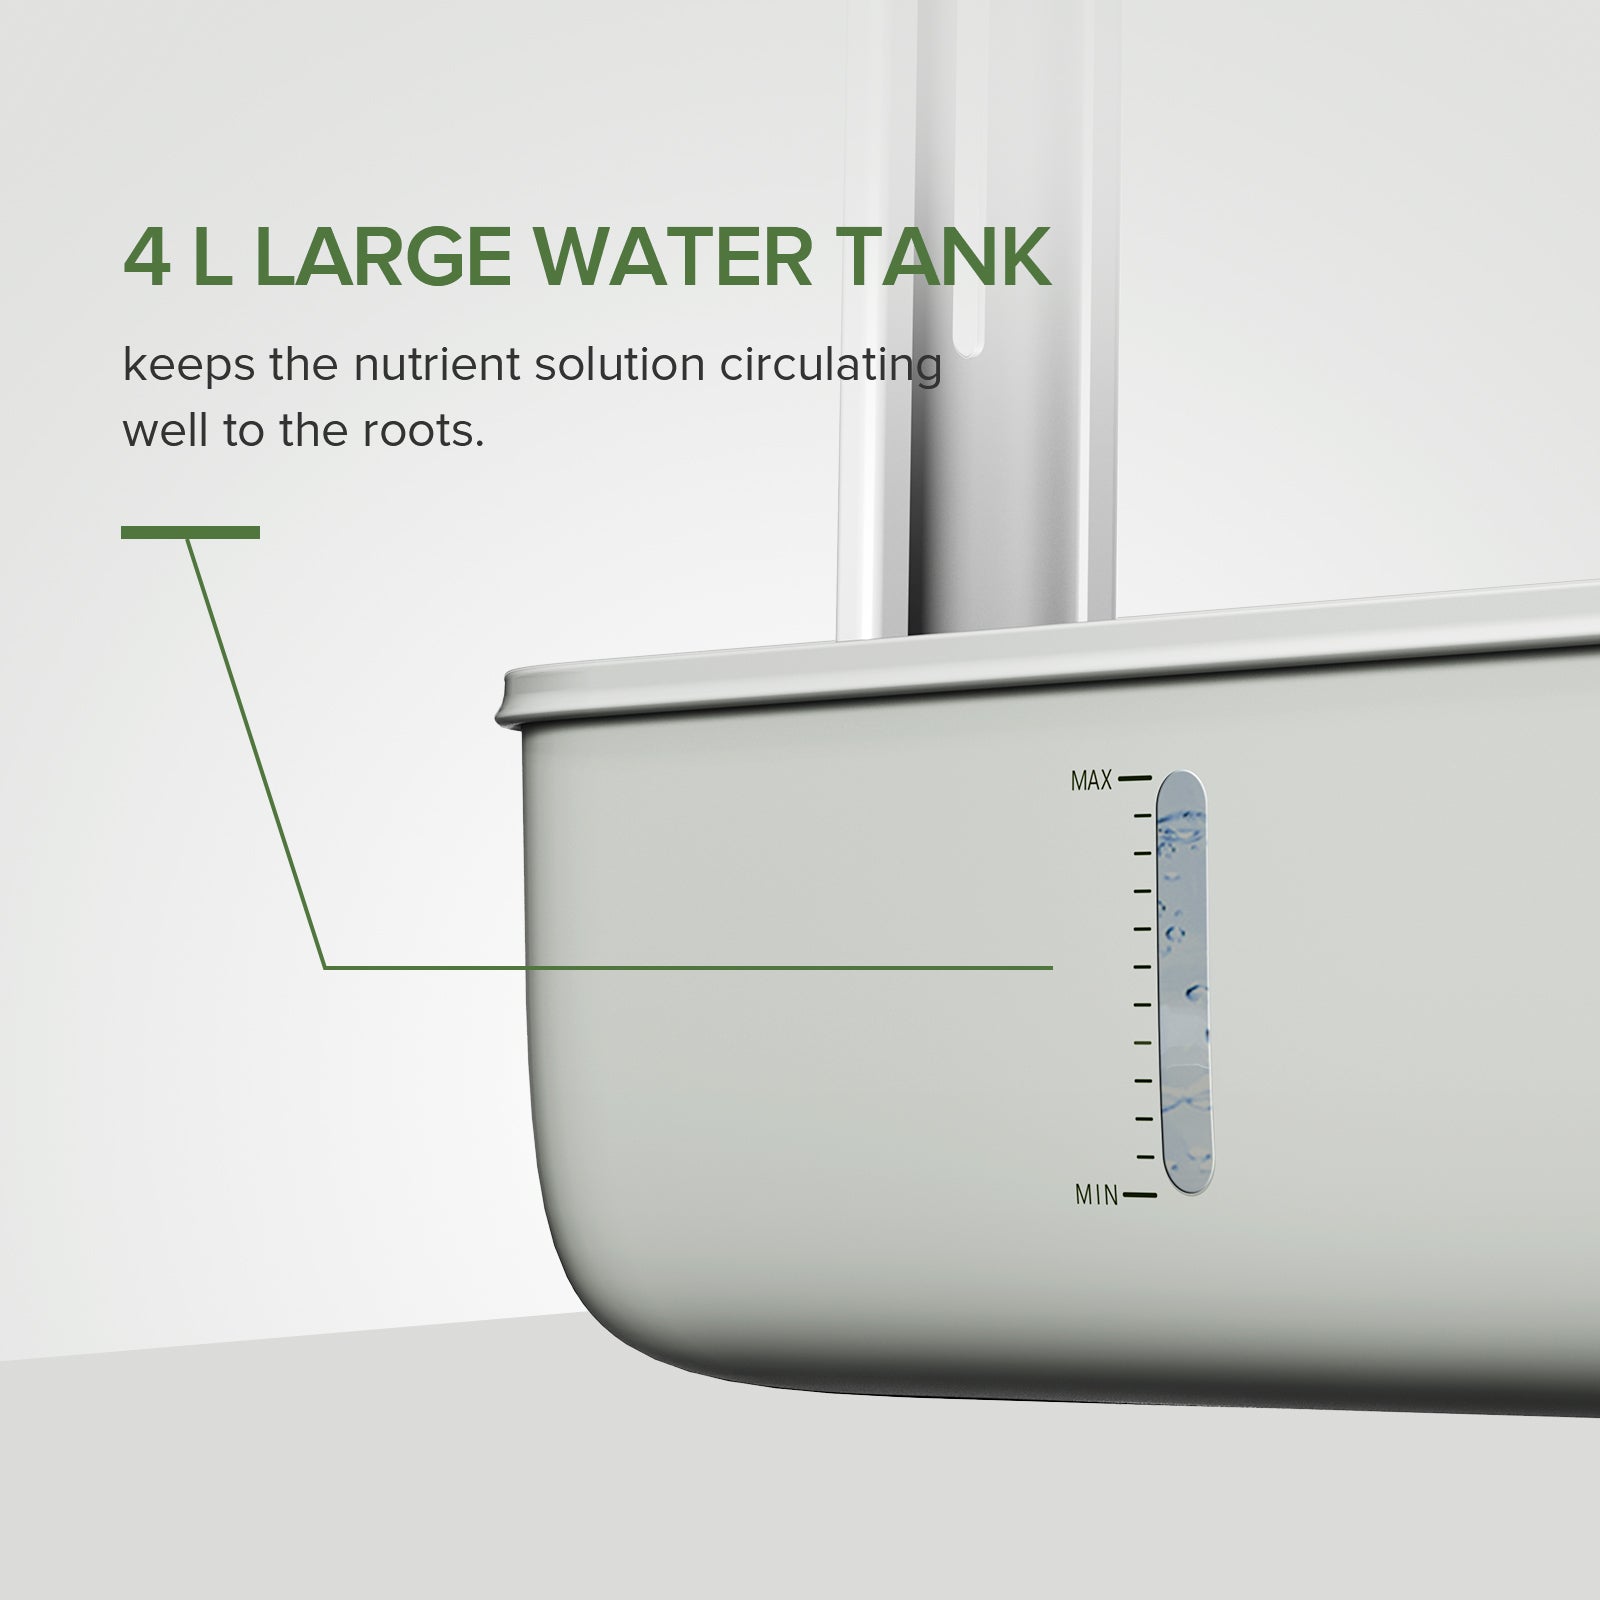 Hydroponics Growing System(US ONLY) has 4L large water tank，which keeps the nutrient solution circulatingwell to the roots.